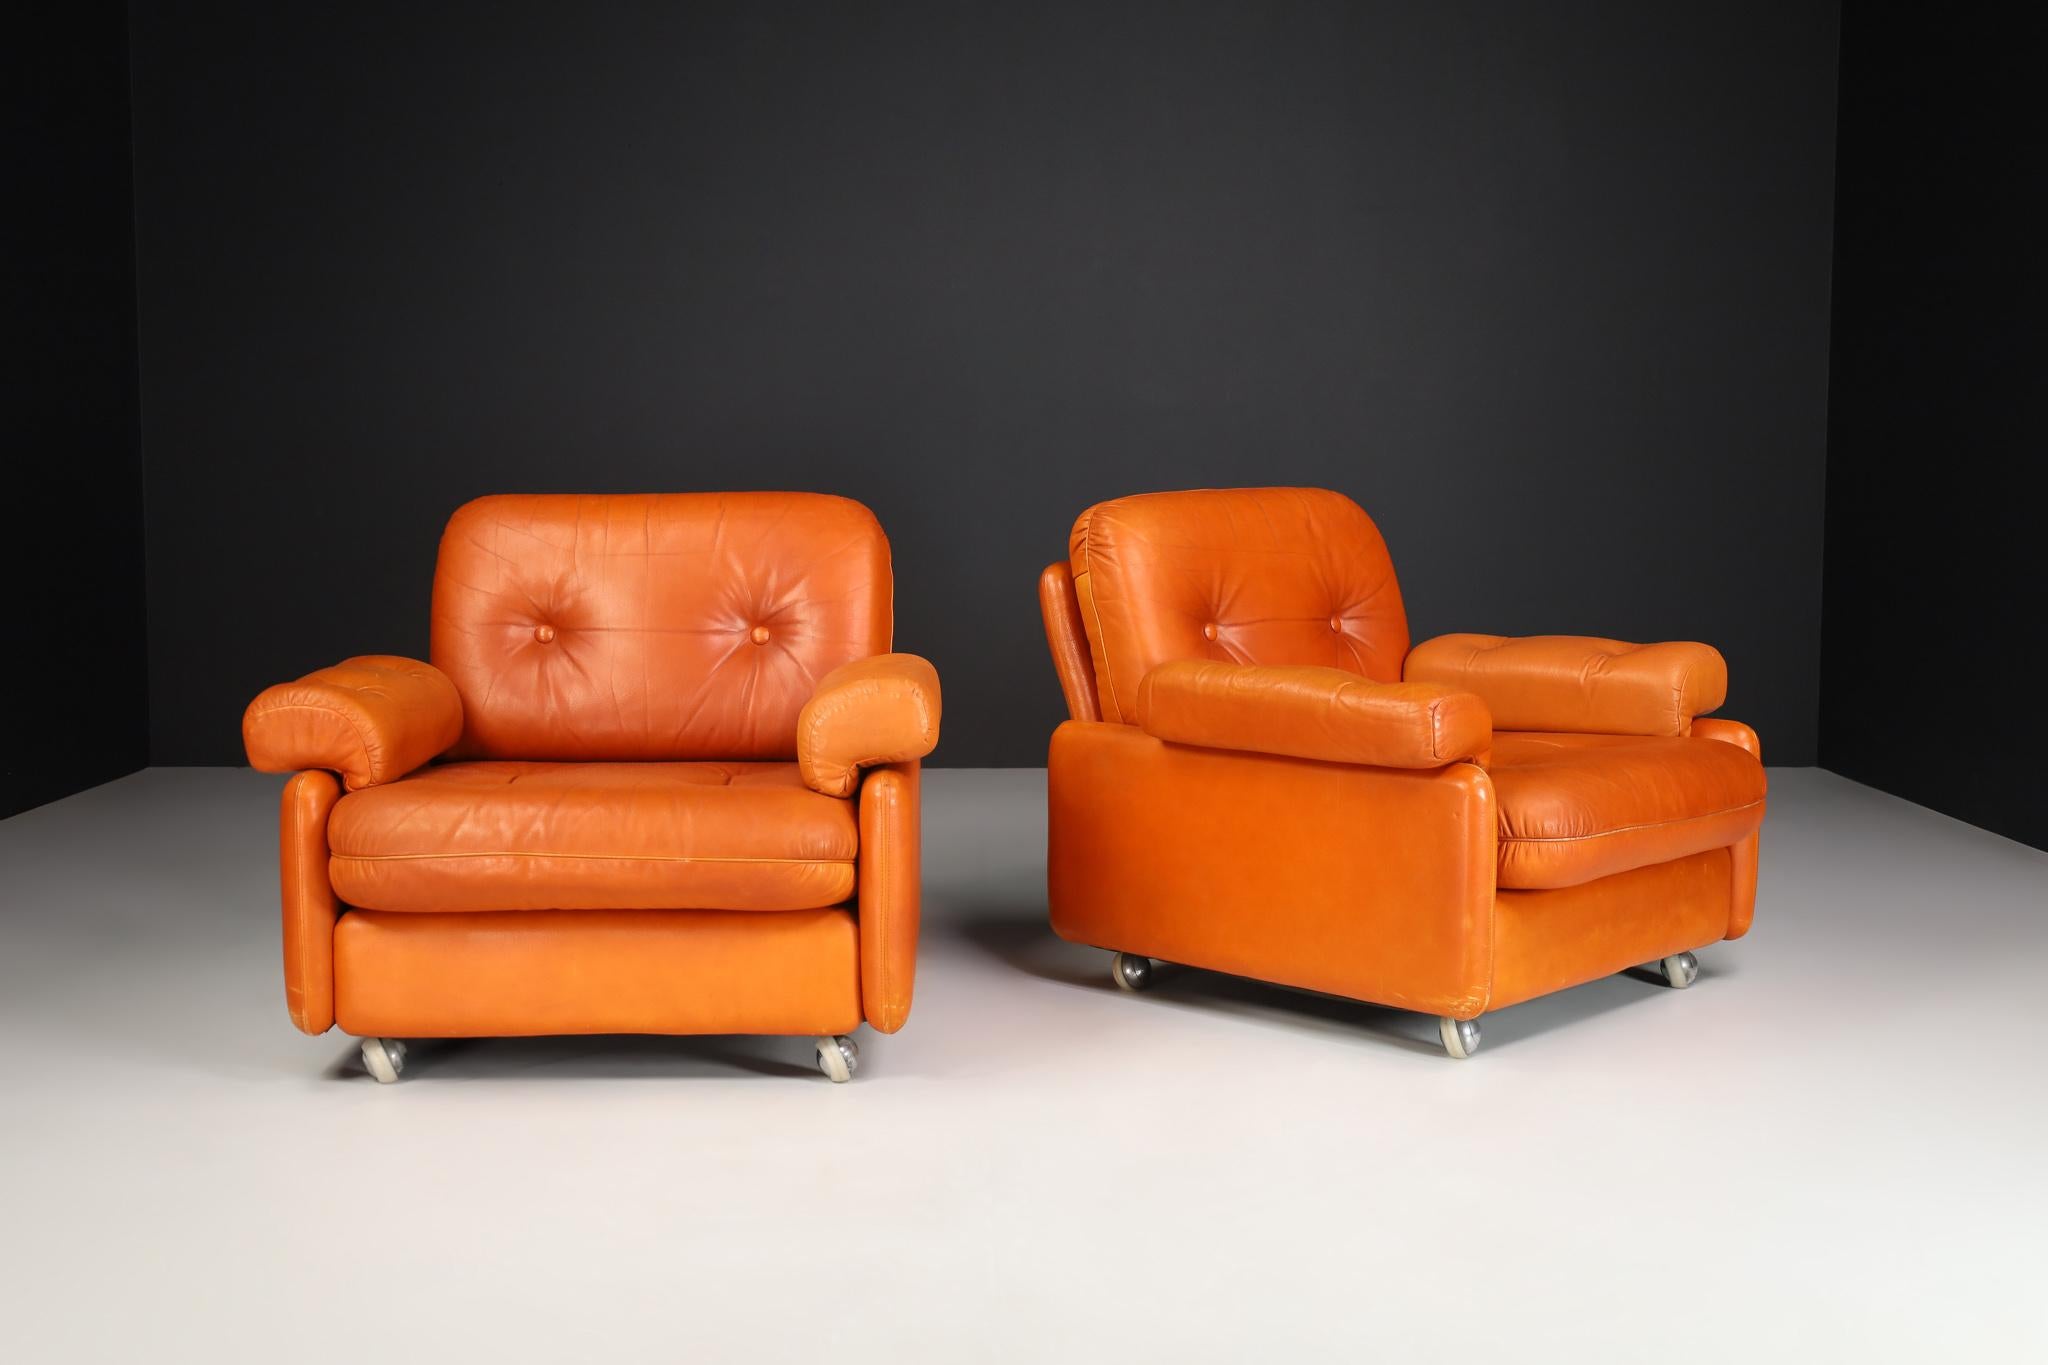 Set of Two Mid-Century Modern leather armchairs, Germany 1960s.

Mid-Century Modern leather lounge armchairs manufactured and designed in Germany 1960s. It is in beautiful vintage condition, with a minor patina on the leather. This set of